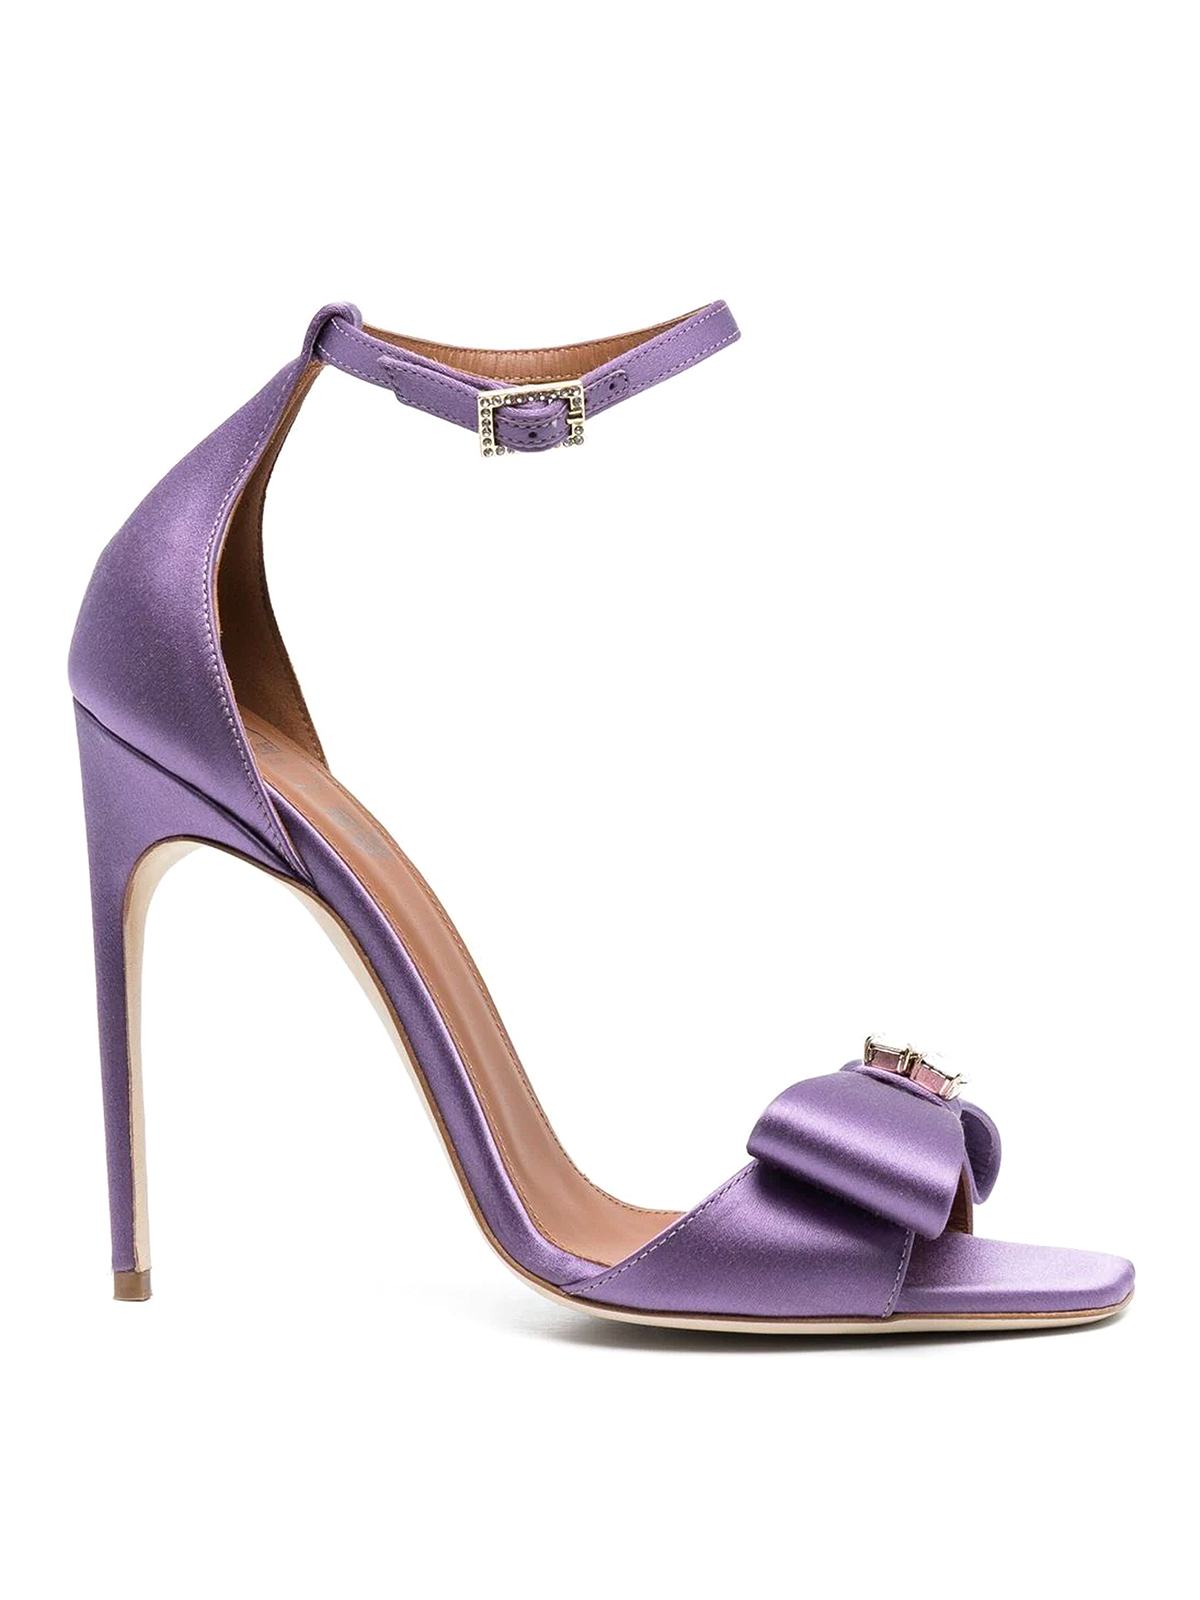 Sandals Malone Souliers - Satin sandals with bow - EMILY1102LILAC